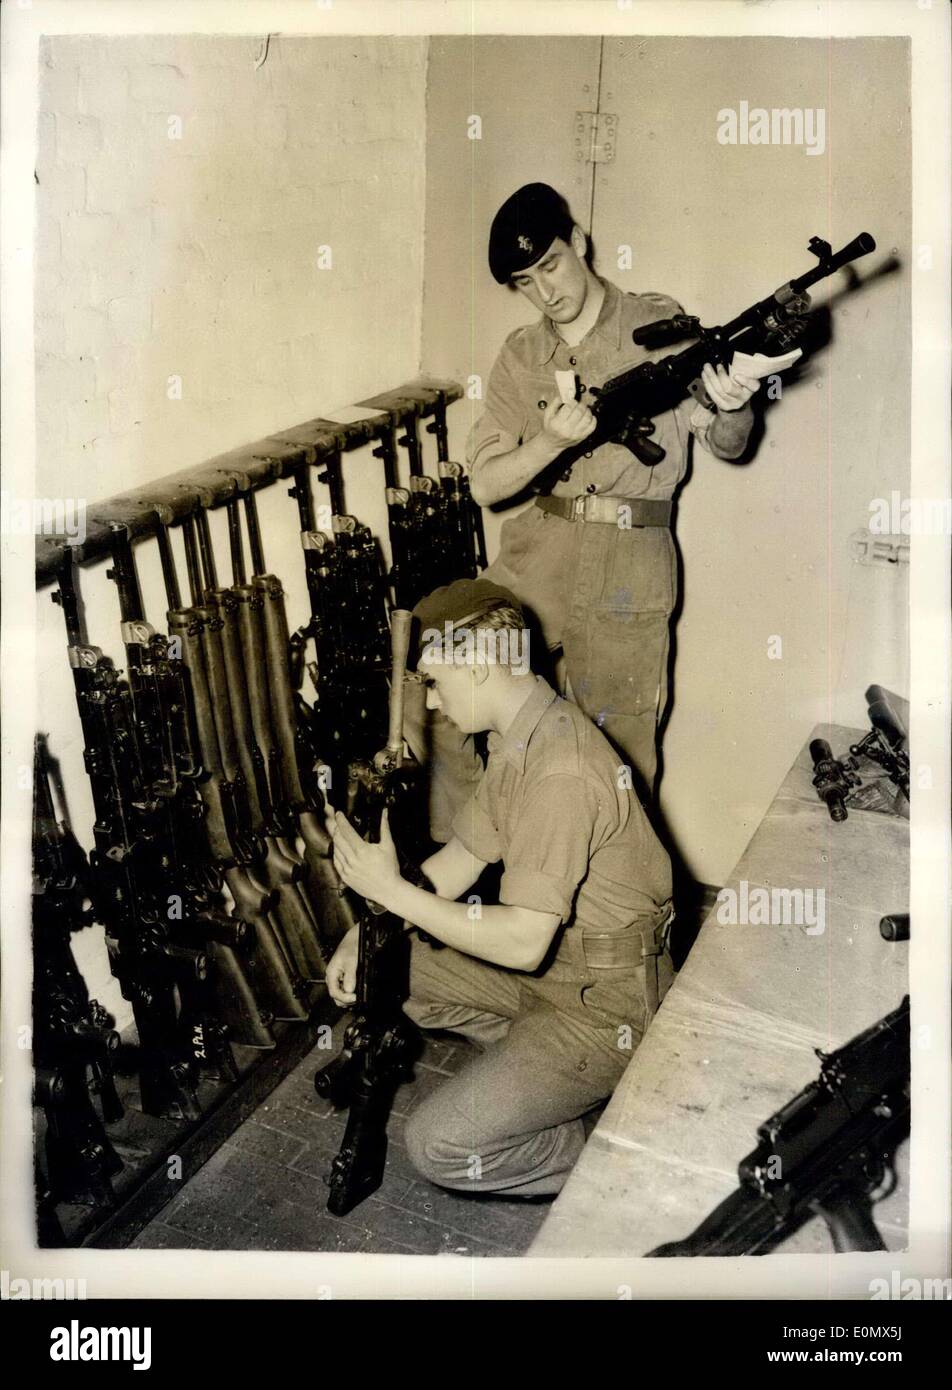 Aug. 03, 1956 - Operation Suez commence's checking arms - at Warley Barracks.: Men of the Oxford and Bucks Light Infantry were to be seen preparing for duty at the Warley Barracks, Essez - today - owing to the Suez Canal Emergency. Some have been recalled from leave. Photo shows checking arms in the armoury - at the Barracks today. PTE. John Bailey (19) from Wellington Shrepshire (nearest camera) and L/CPL.John Graham of R.E.M.E. from Liverpool. He is 19. Stock Photo